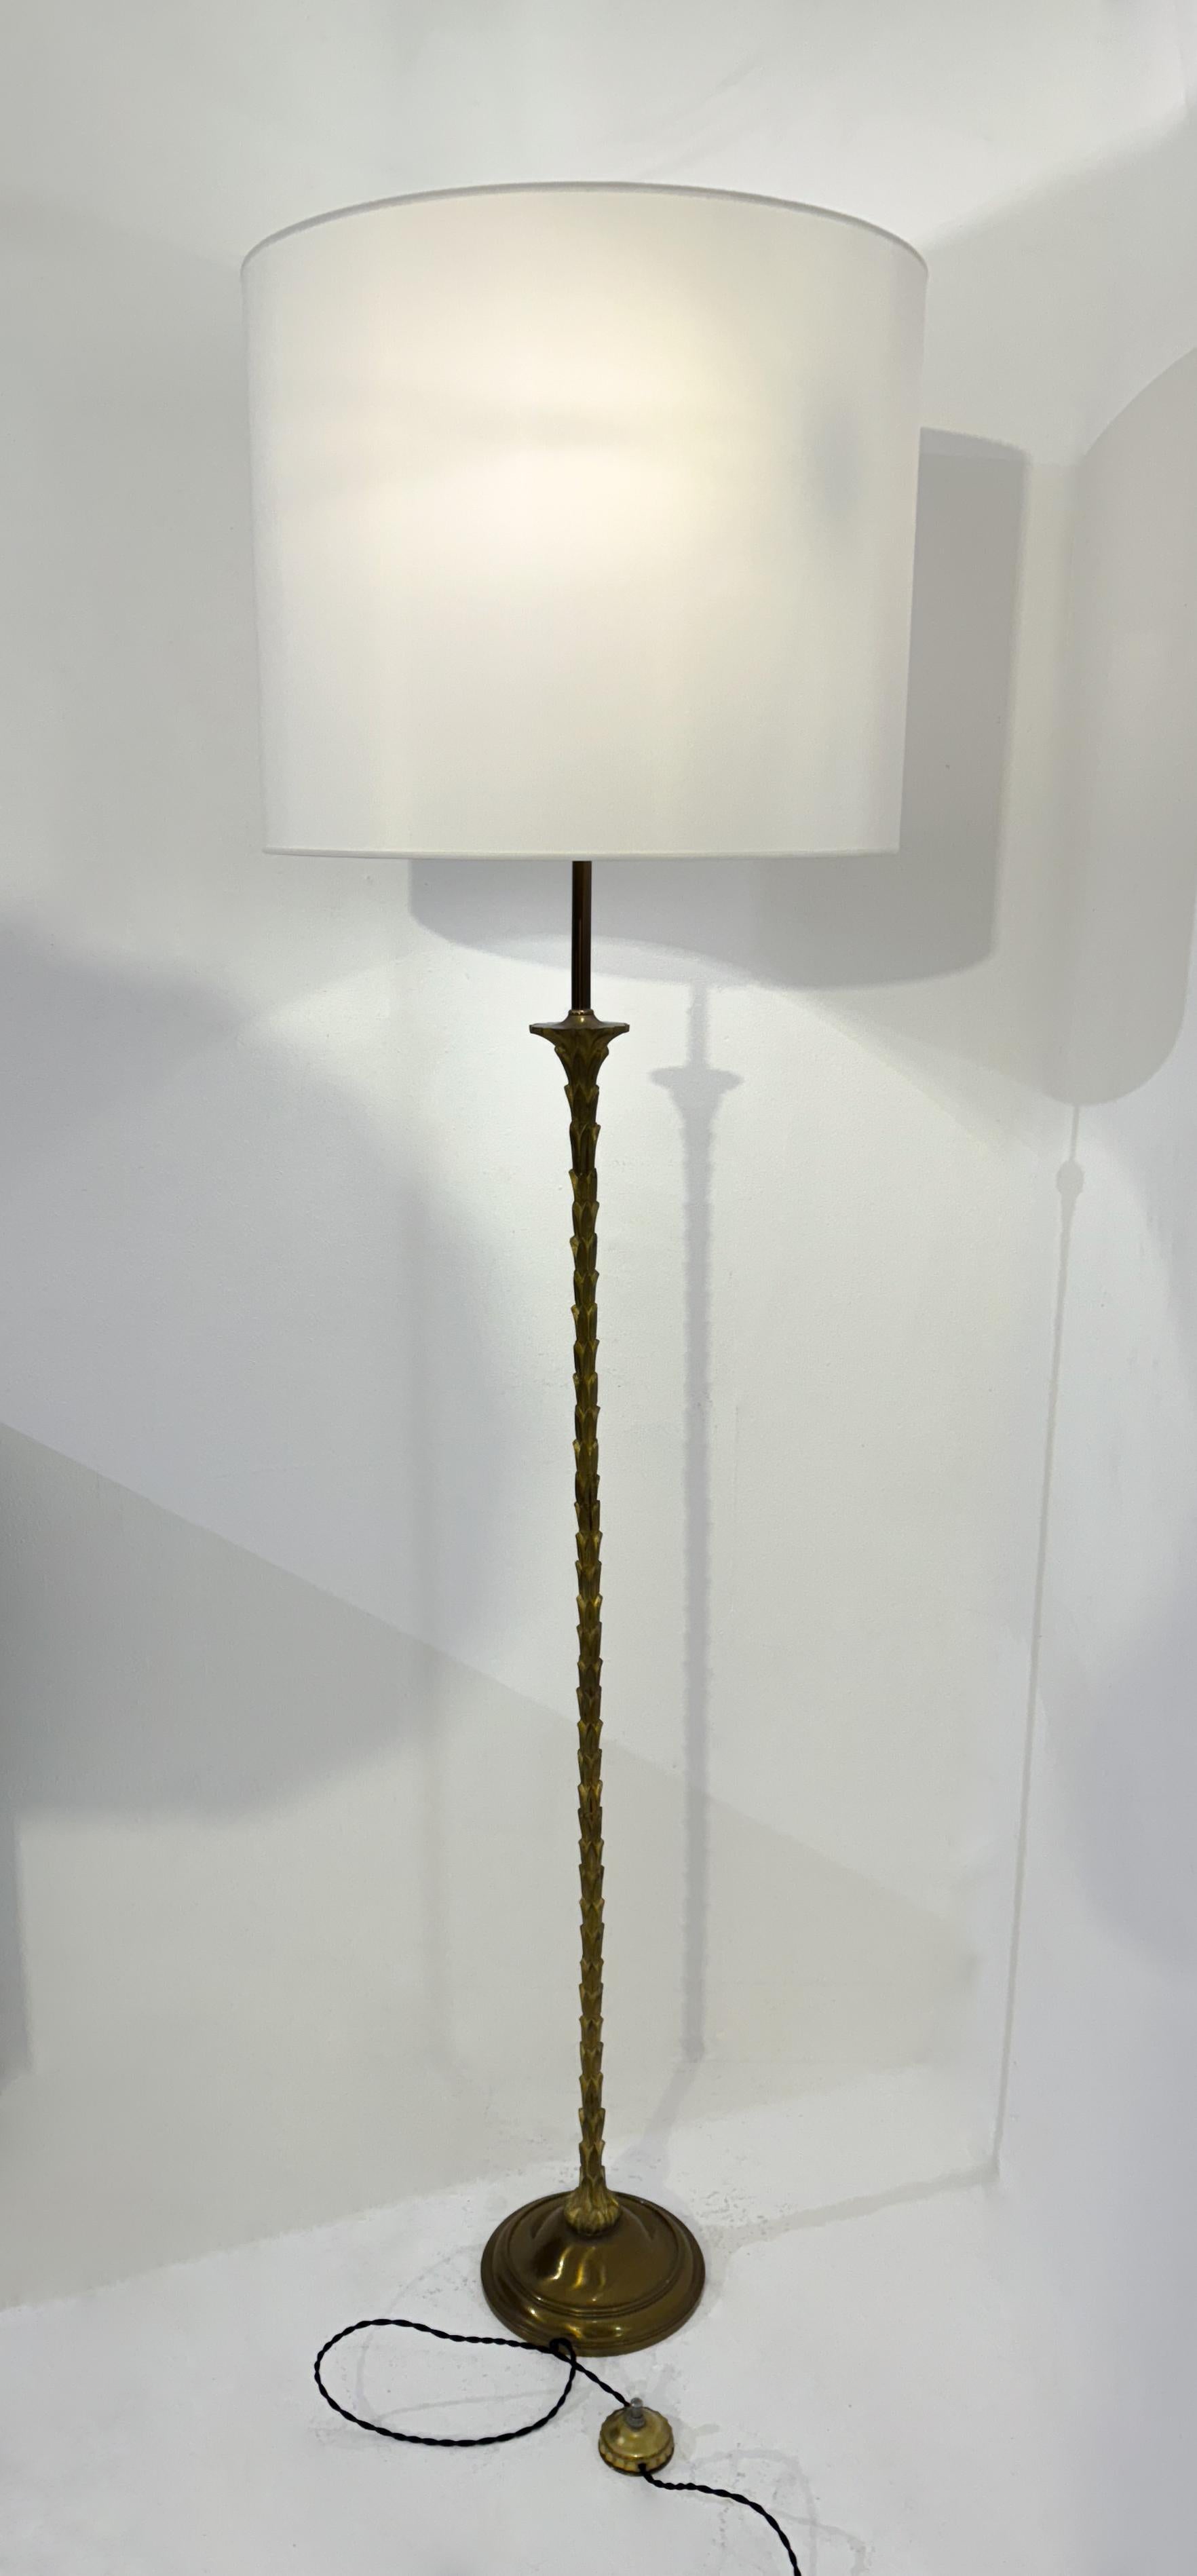 Mid-20th Century Mid-Century Brass Floor Lamp by Maison Baguès, France, 1950s For Sale